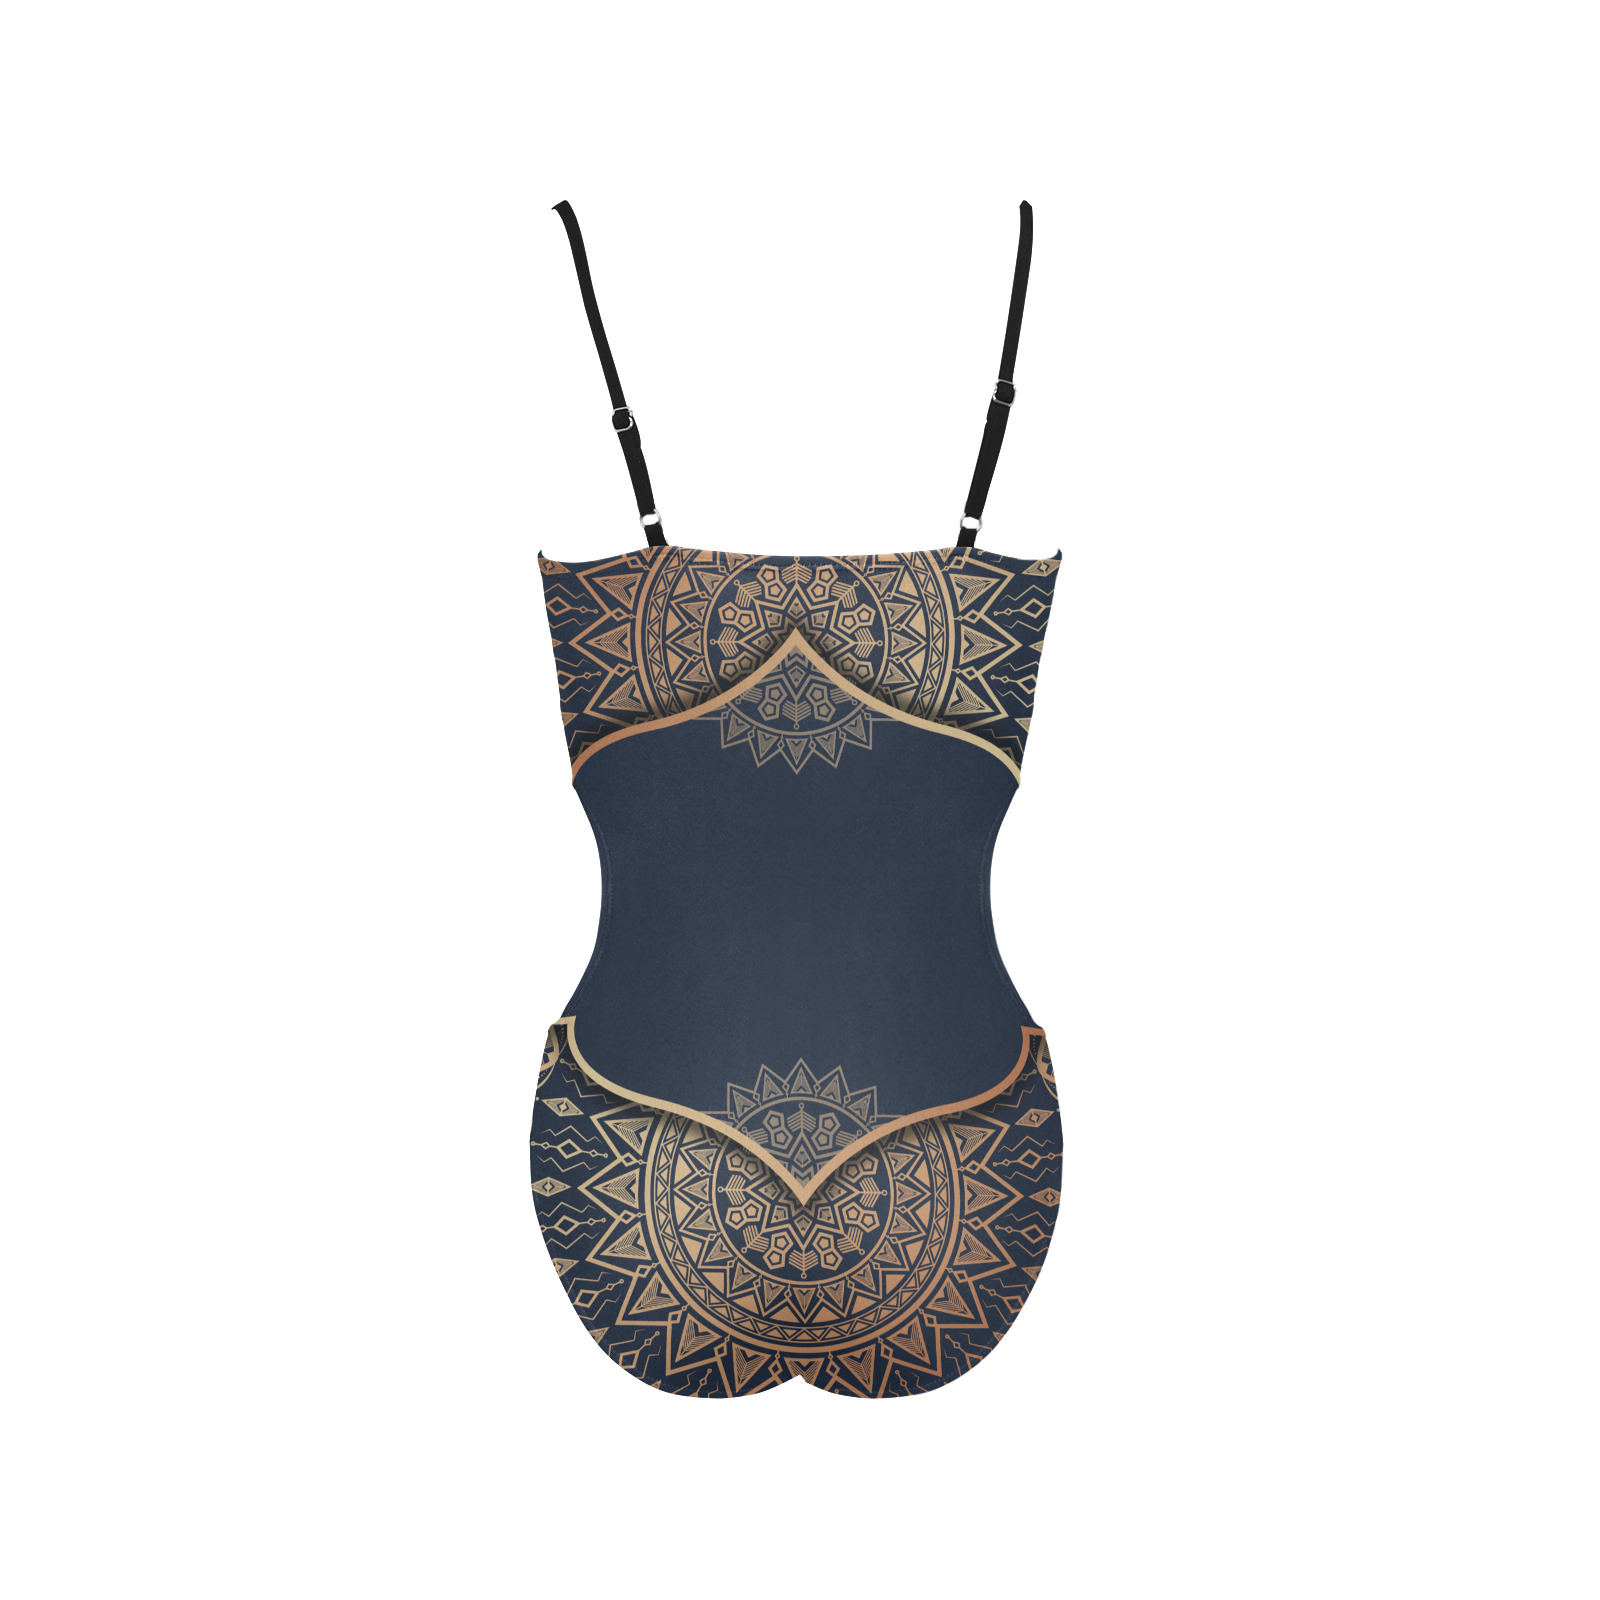 Mandala Armor in navy and gold tones Spaghetti Strap Cut Out Sides Swimsuit (Model S28)